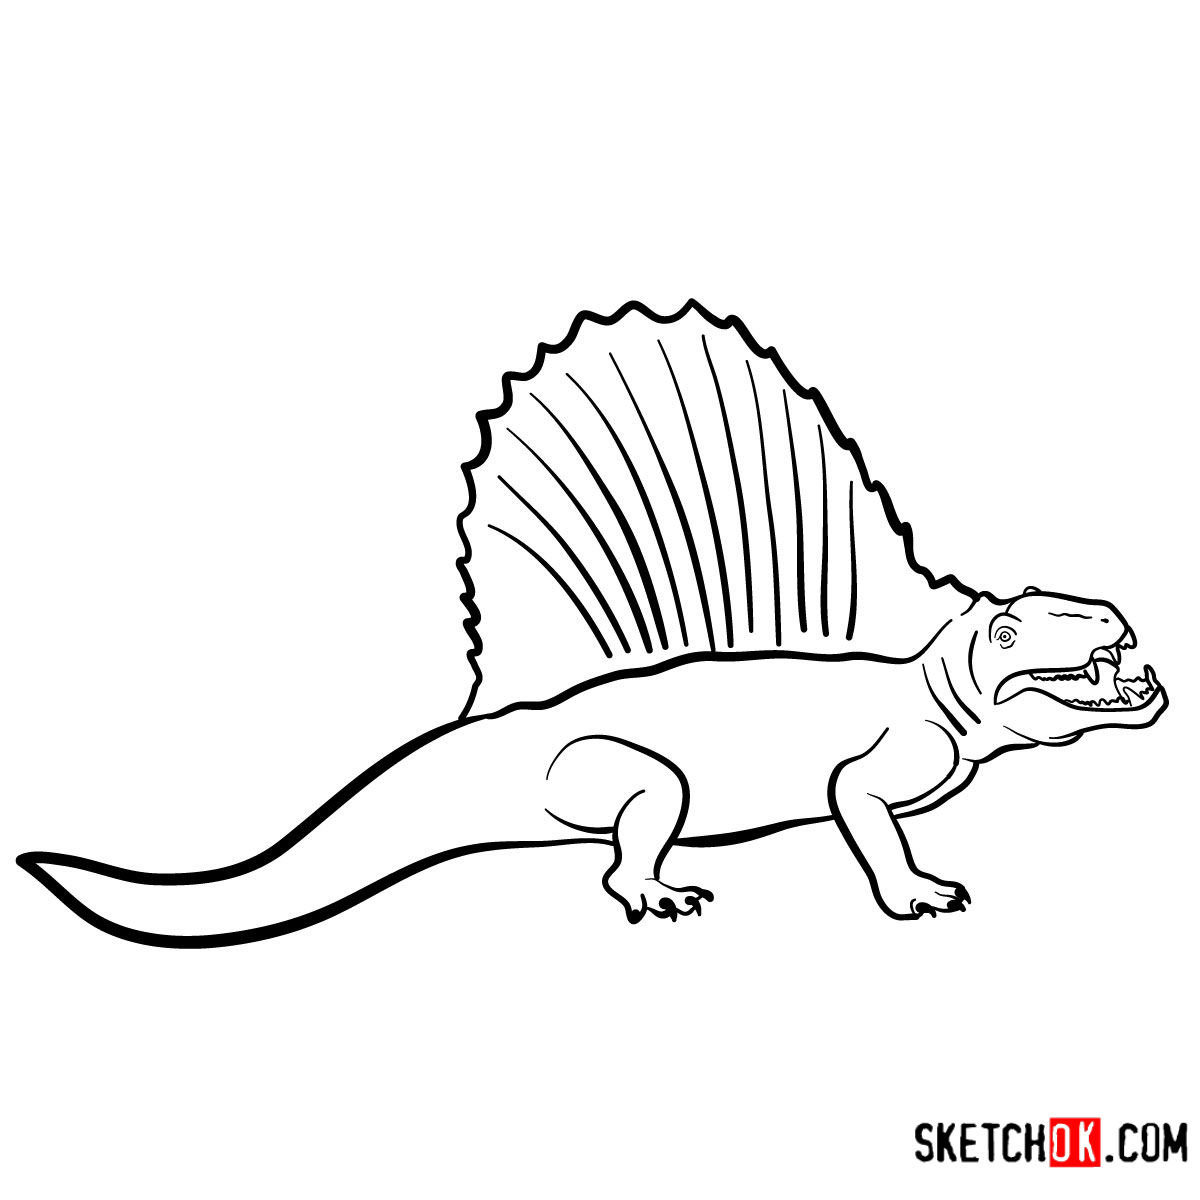 How to draw a Dimetrodon | Extinct Animals - Sketchok easy drawing guides